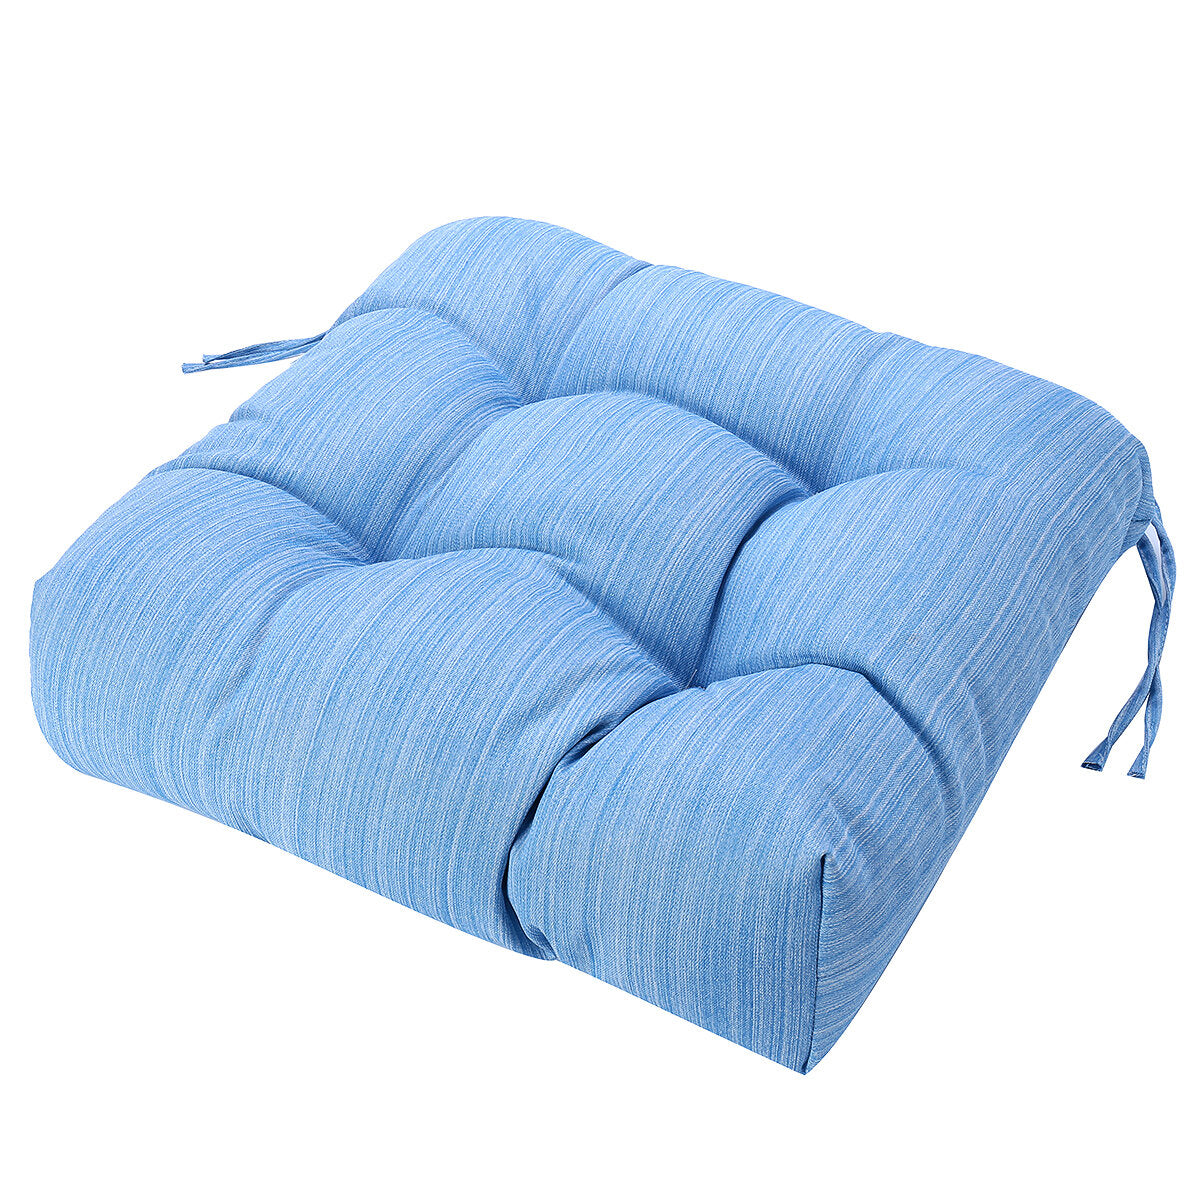 Outdoor Chair Cushion Waterproof Sofa Padded Cushion PP Cotton with Bandage Home Office Student Seat Supplies